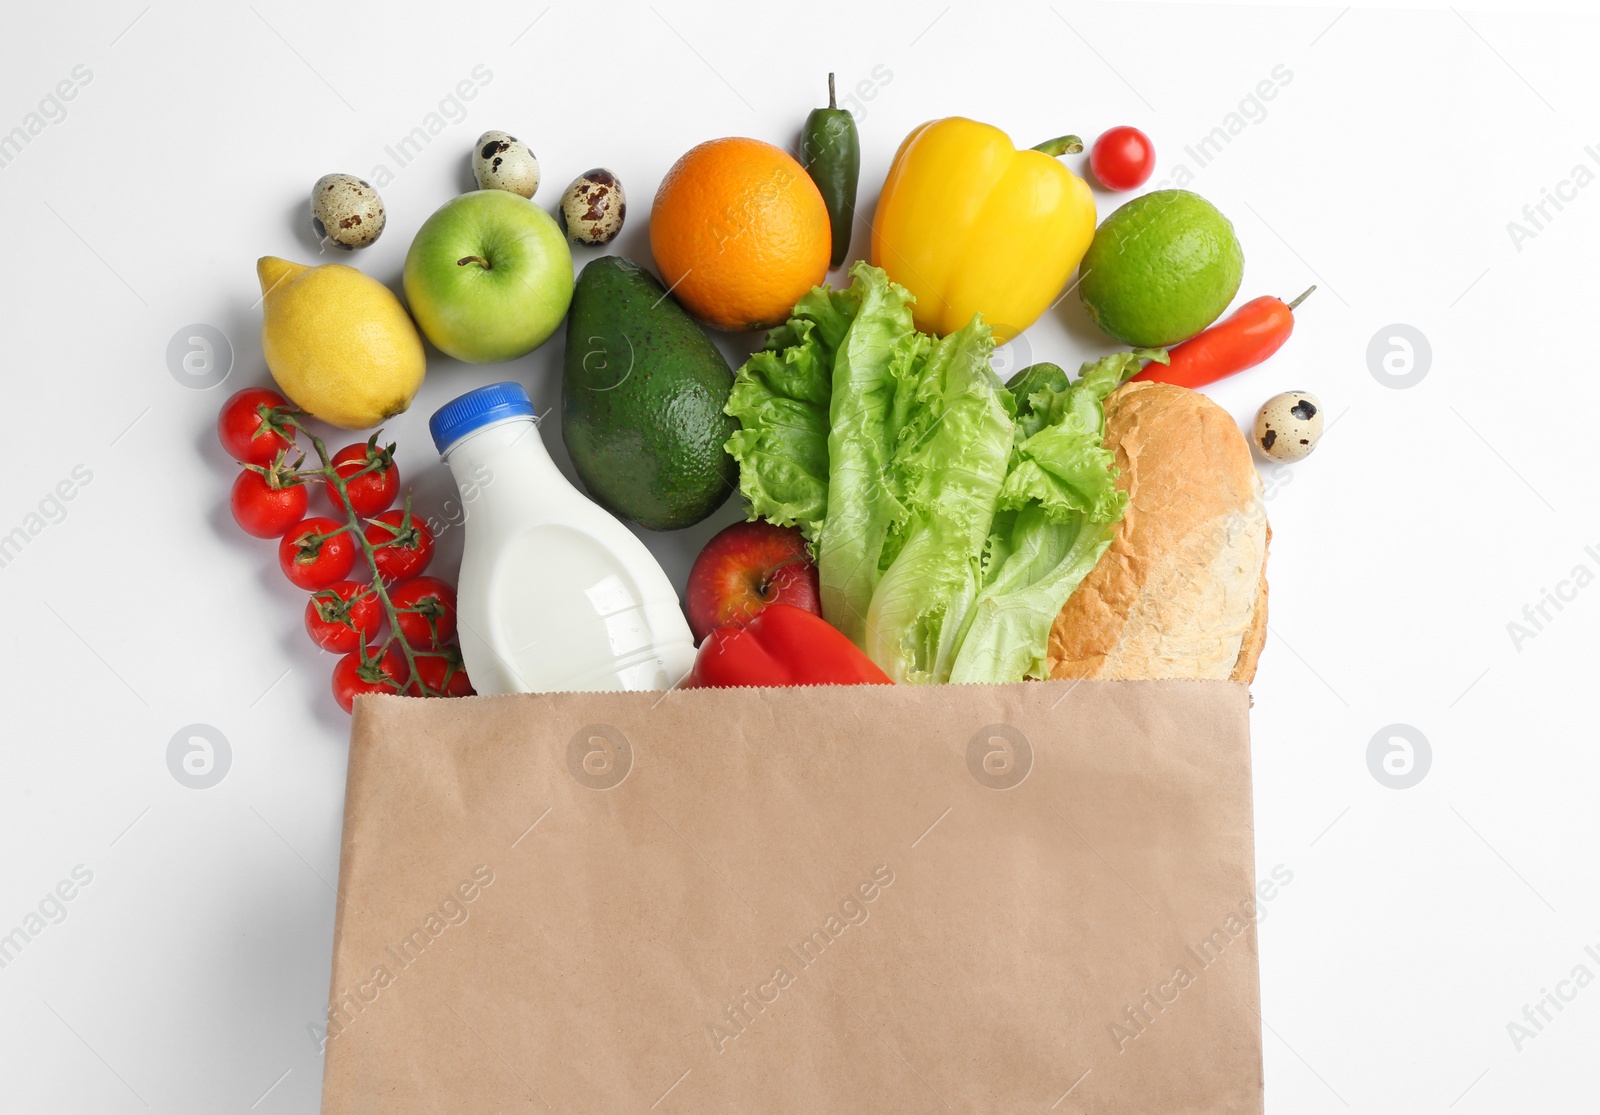 Photo of Paper bag with different groceries on white background, top view